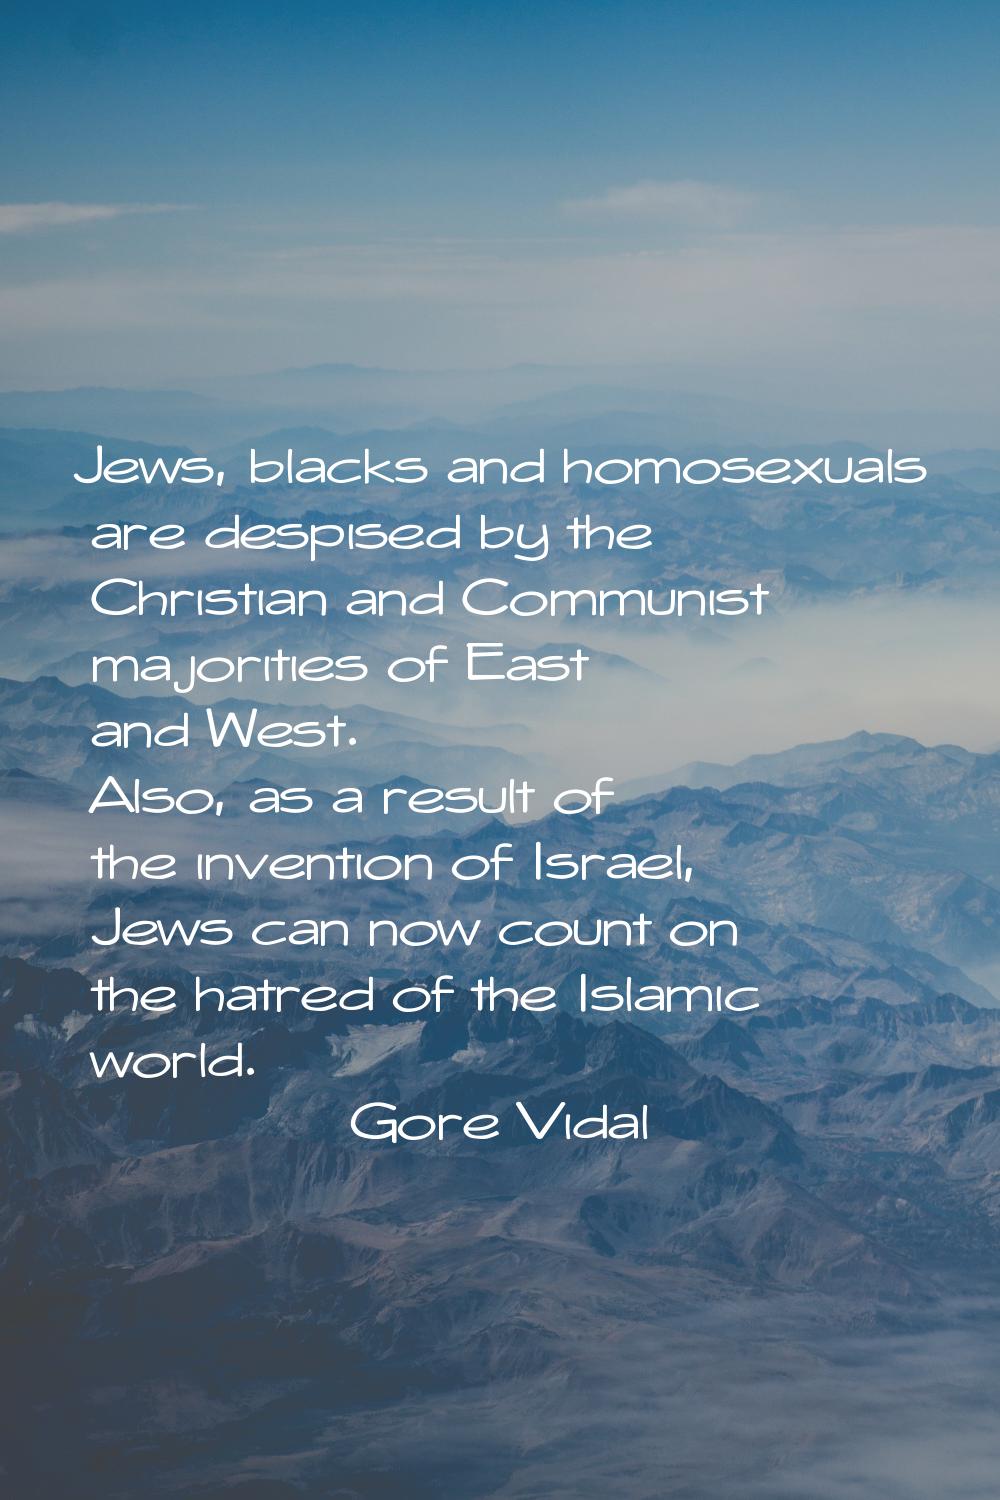 Jews, blacks and homosexuals are despised by the Christian and Communist majorities of East and Wes